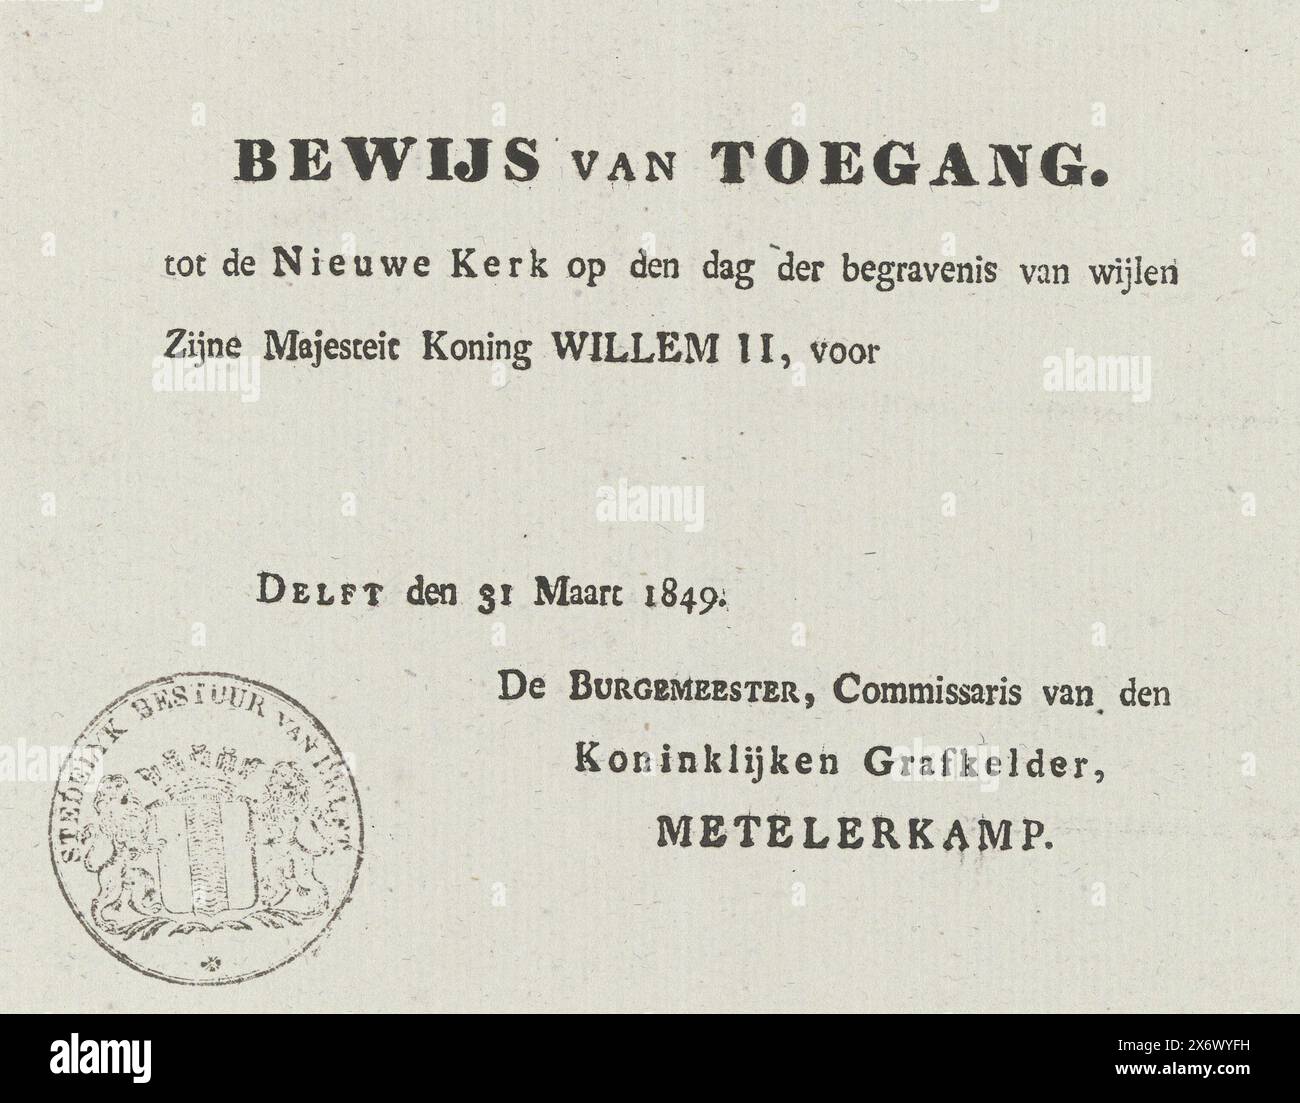 Entrance ticket for the funeral of King William II, 1849, Entrance ticket to the Nieuwe Kerk for the funeral of King Willem II in the Nieuwe Kerk in Delft on April 4, 1849. With stamp of the Municipal Council of Delft., printer: anonymous, Netherlands, 1849, paper, letterpress printing, height, 115 mm × width, 148 mm Stock Photo